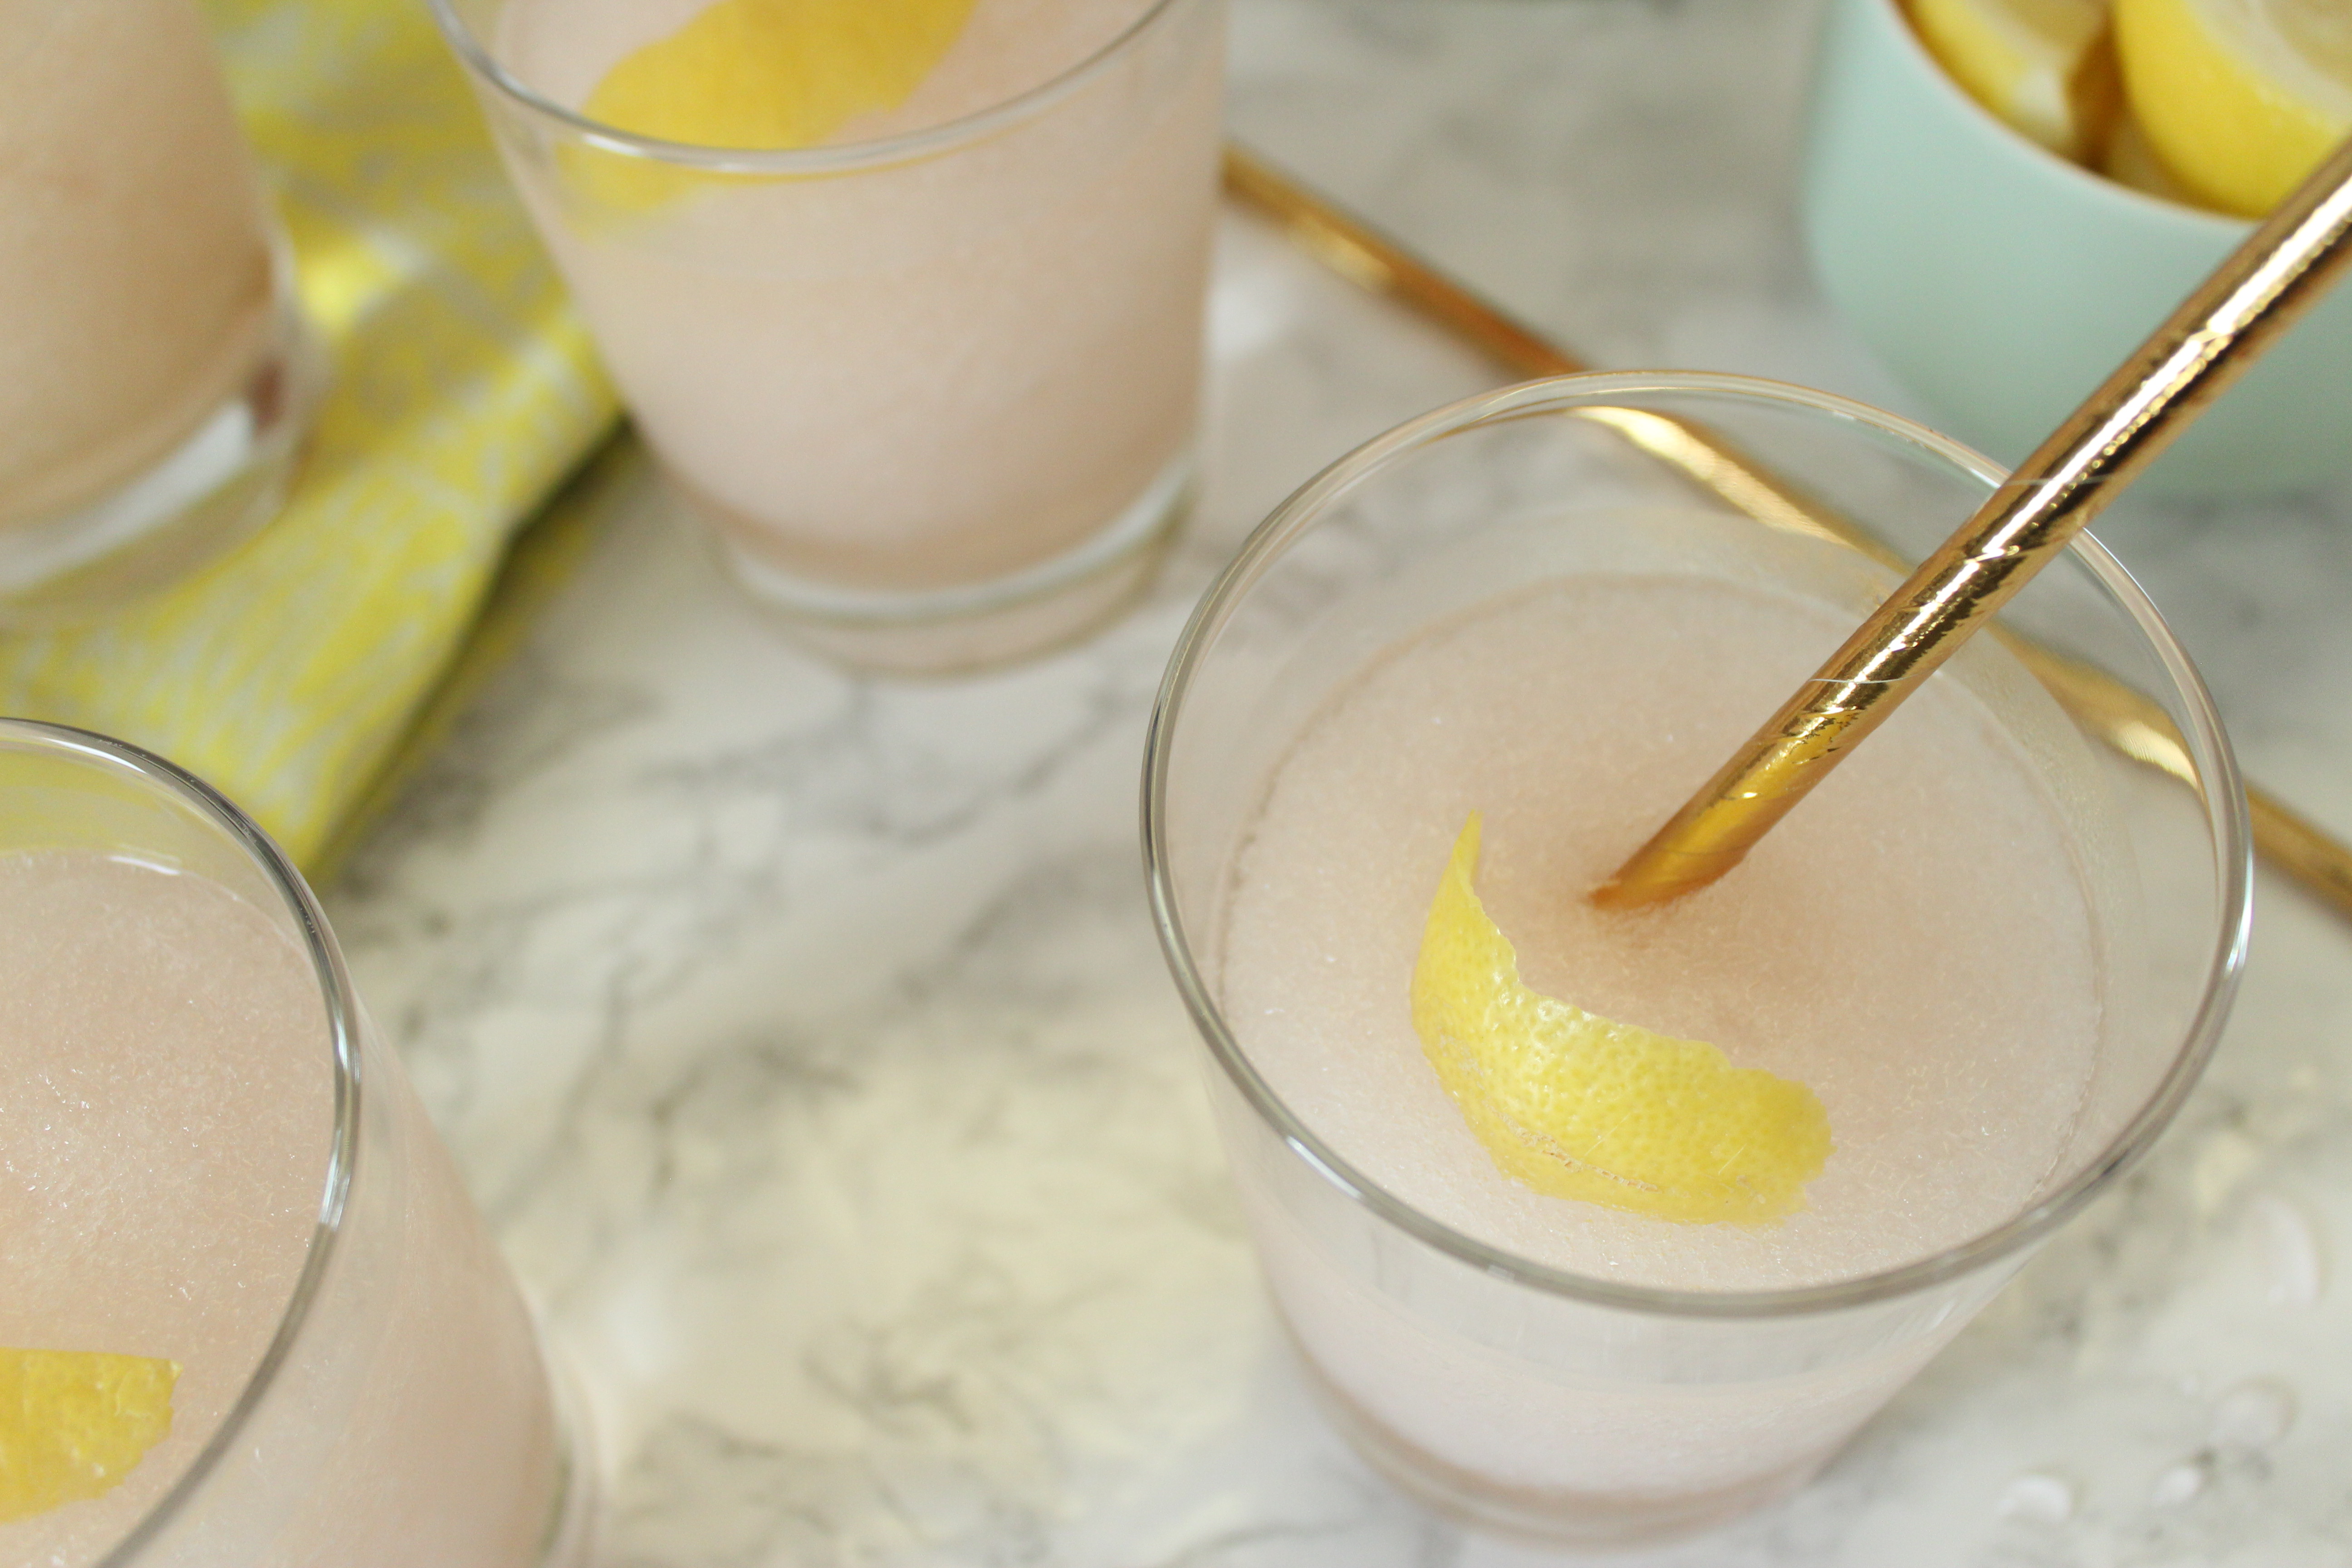 Boozy slushies are one of my favorite food trends and I hope they never go out of style. It sort of takes me back to my childhood, minus the alchol of course.